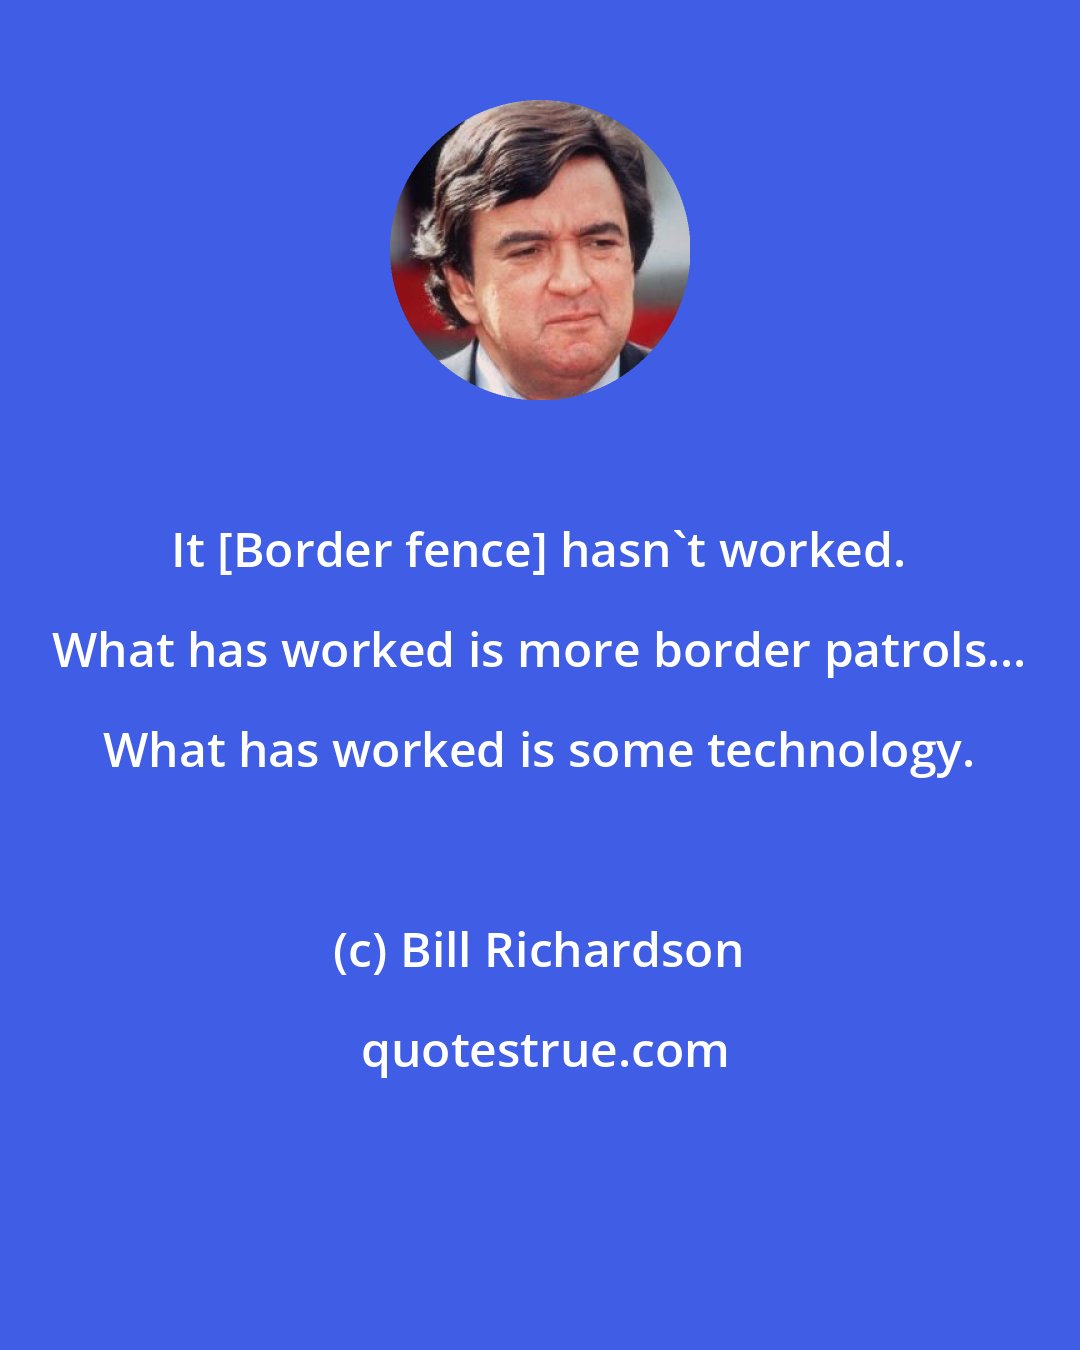 Bill Richardson: It [Border fence] hasn't worked. What has worked is more border patrols... What has worked is some technology.